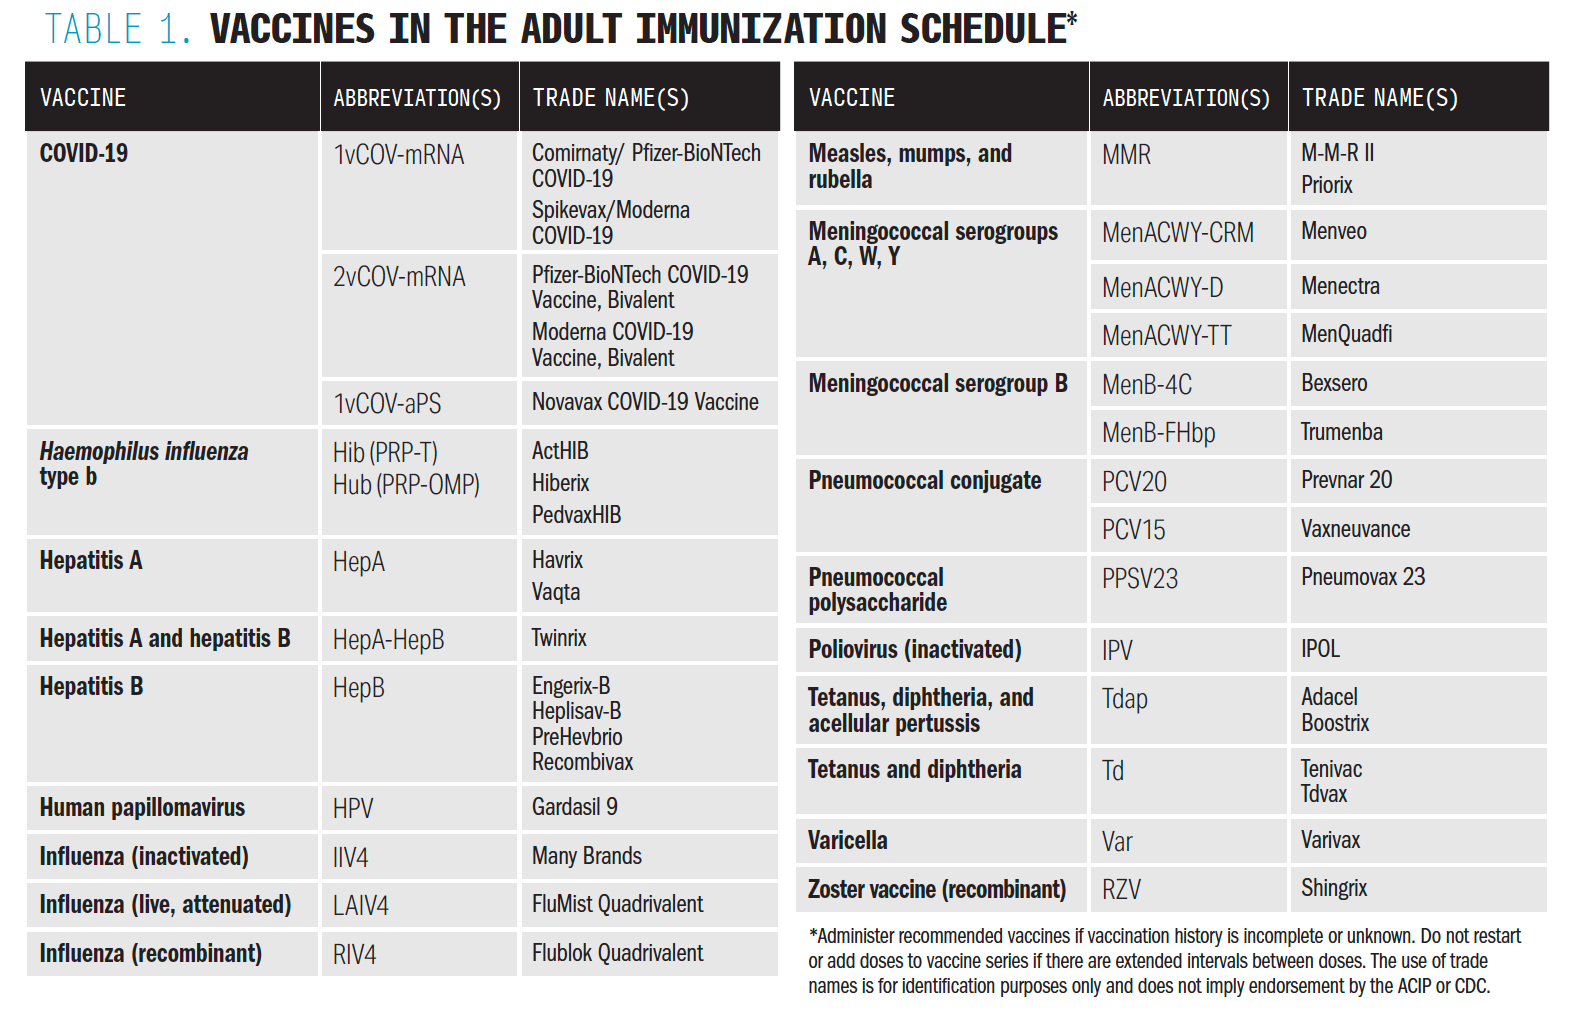 Table 1. Vaccines in the Adult Immunization Schedule*